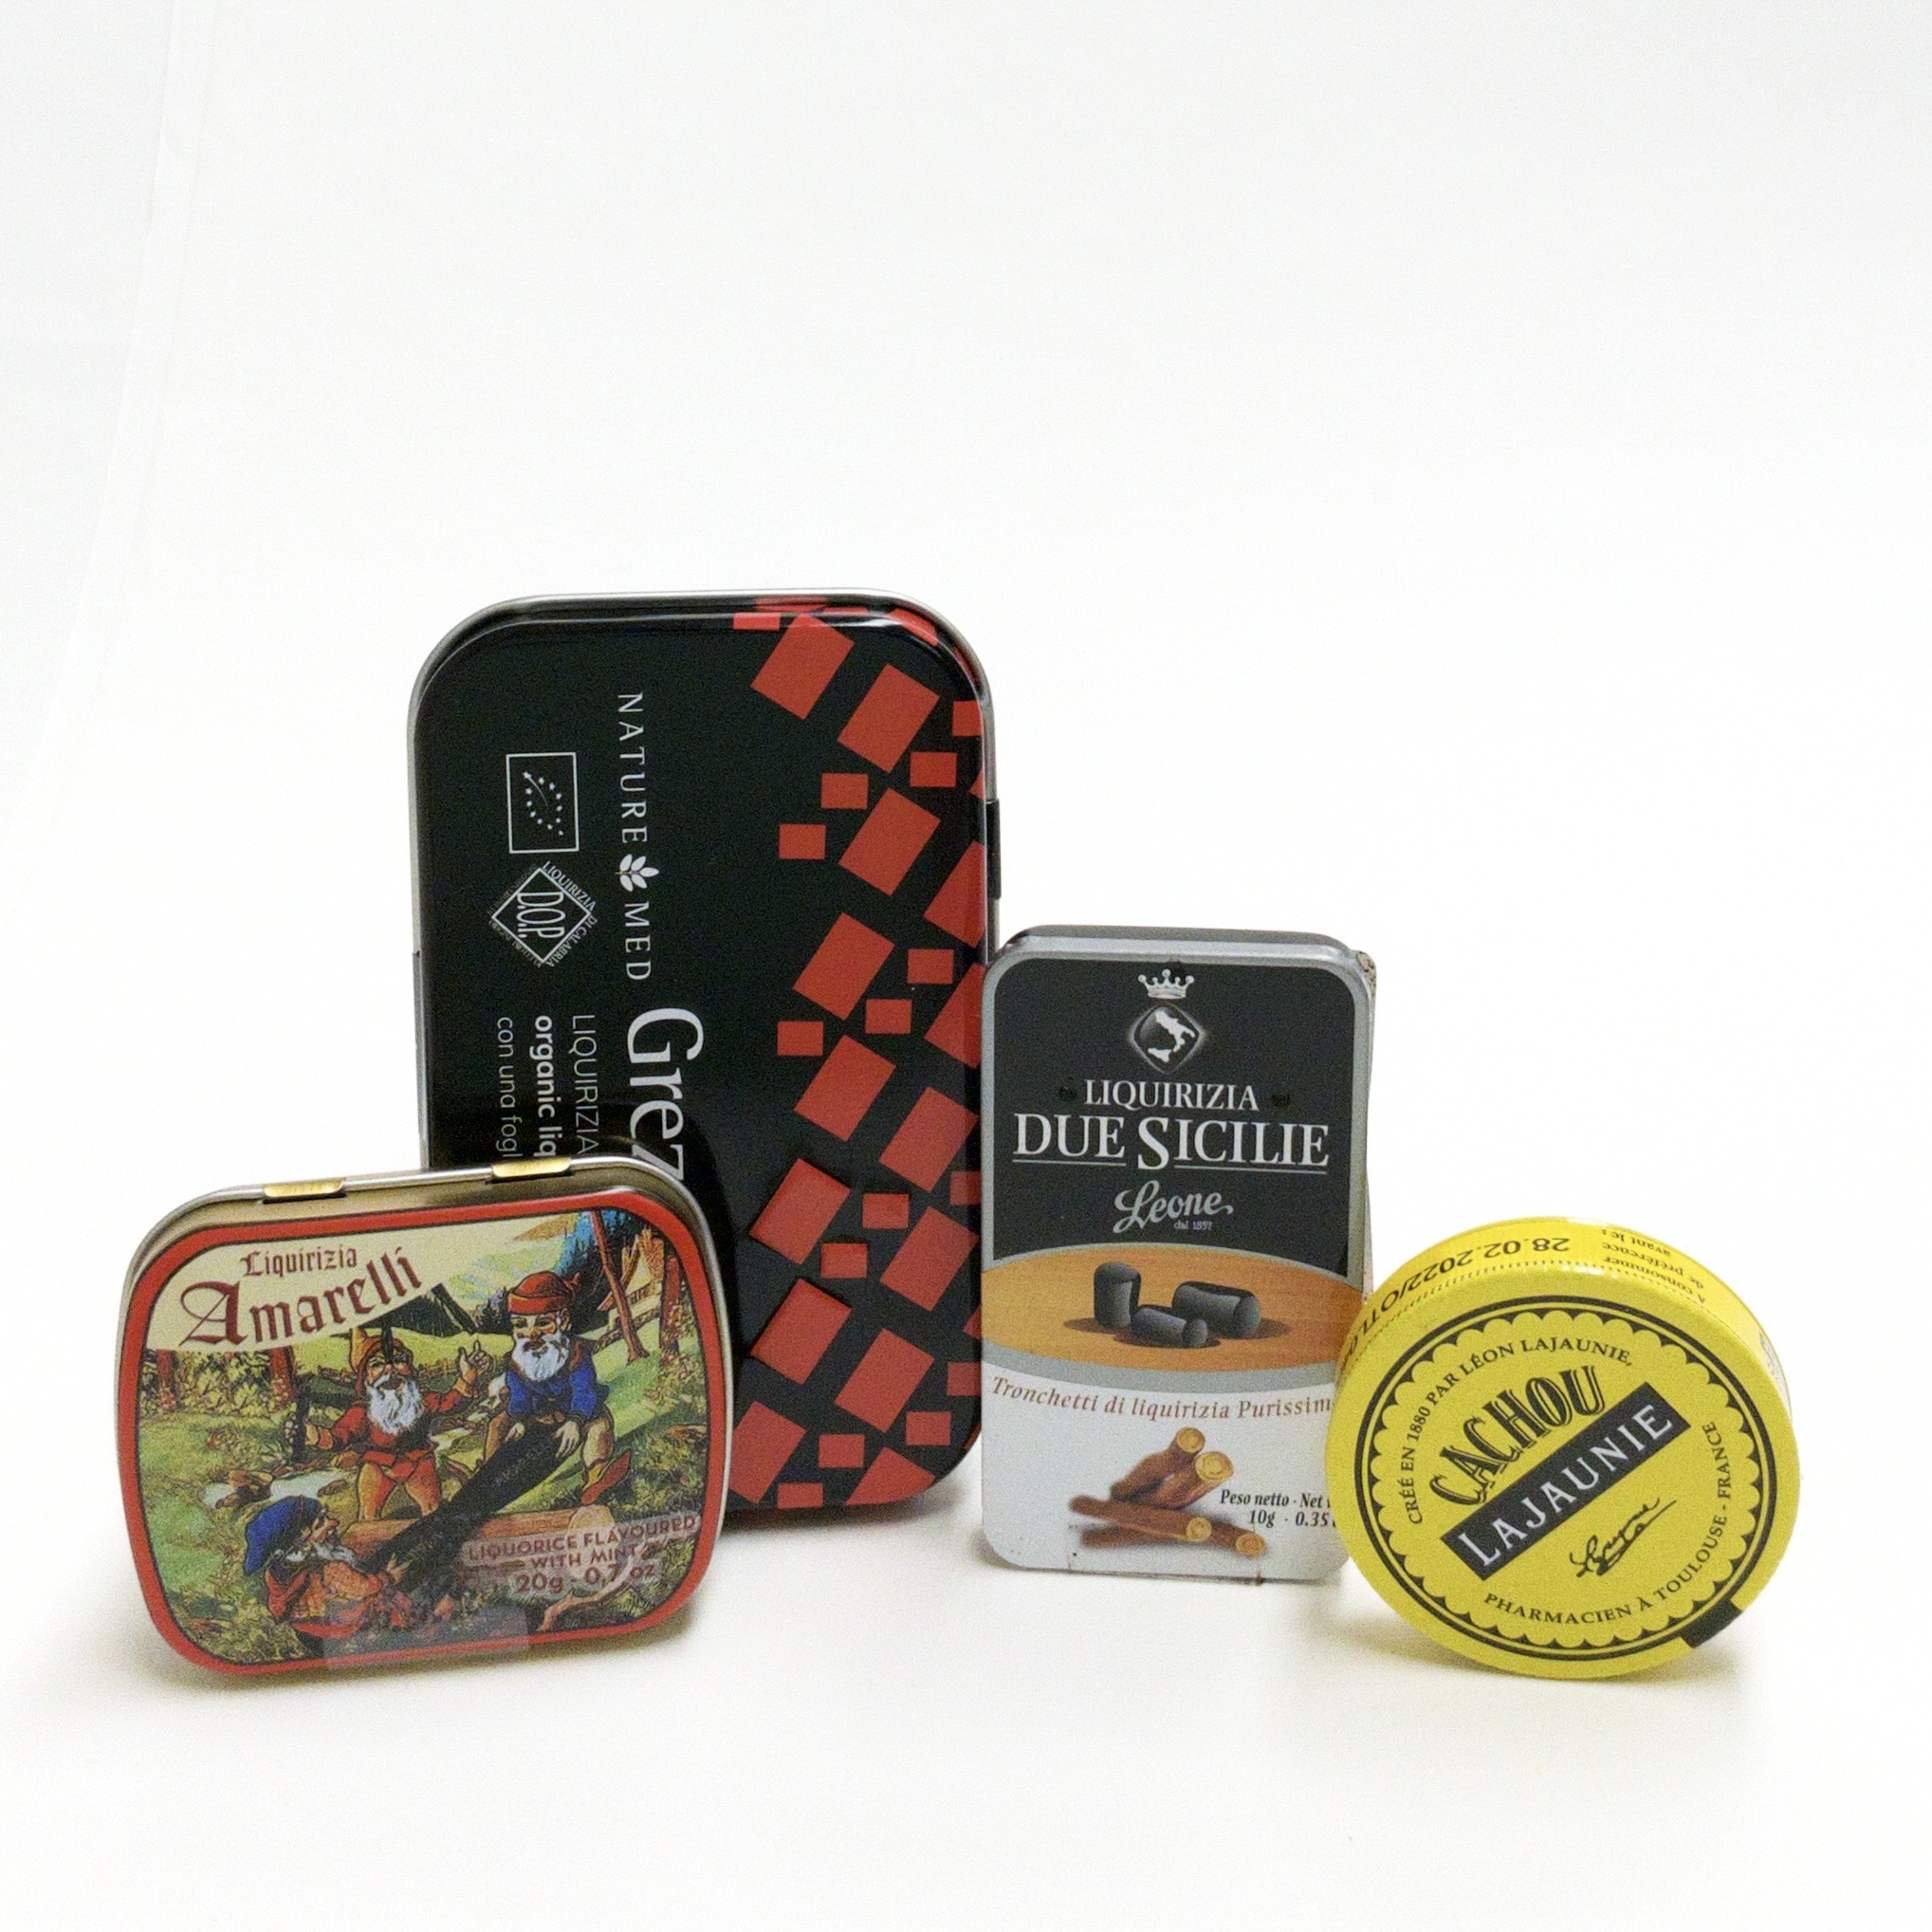 Four natural liquorice from the south of Europe at an introductory price (selection may vary, product photo as example)